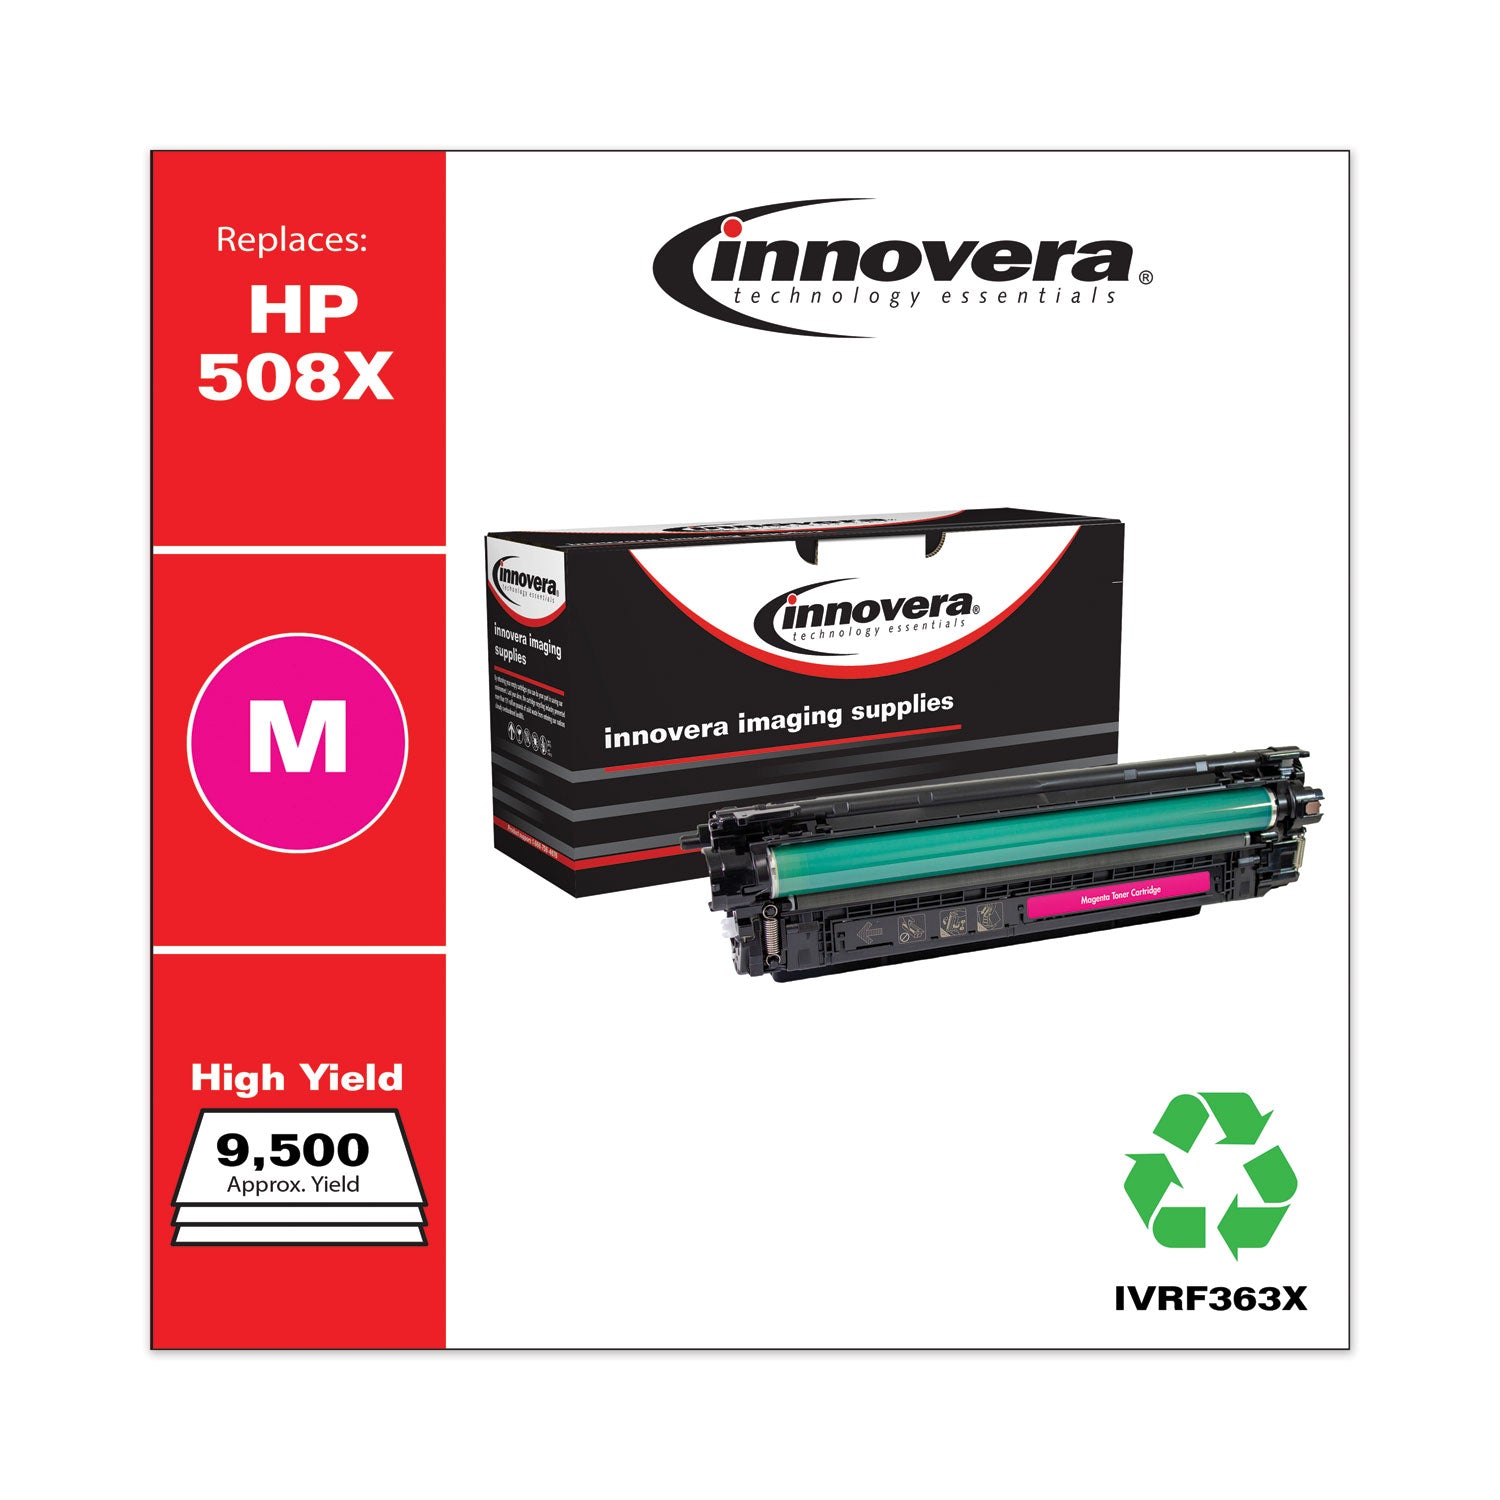 remanufactured-magenta-high-yield-toner-replacement-for-508x-cf363x-9500-page-yield_ivrf363x - 2